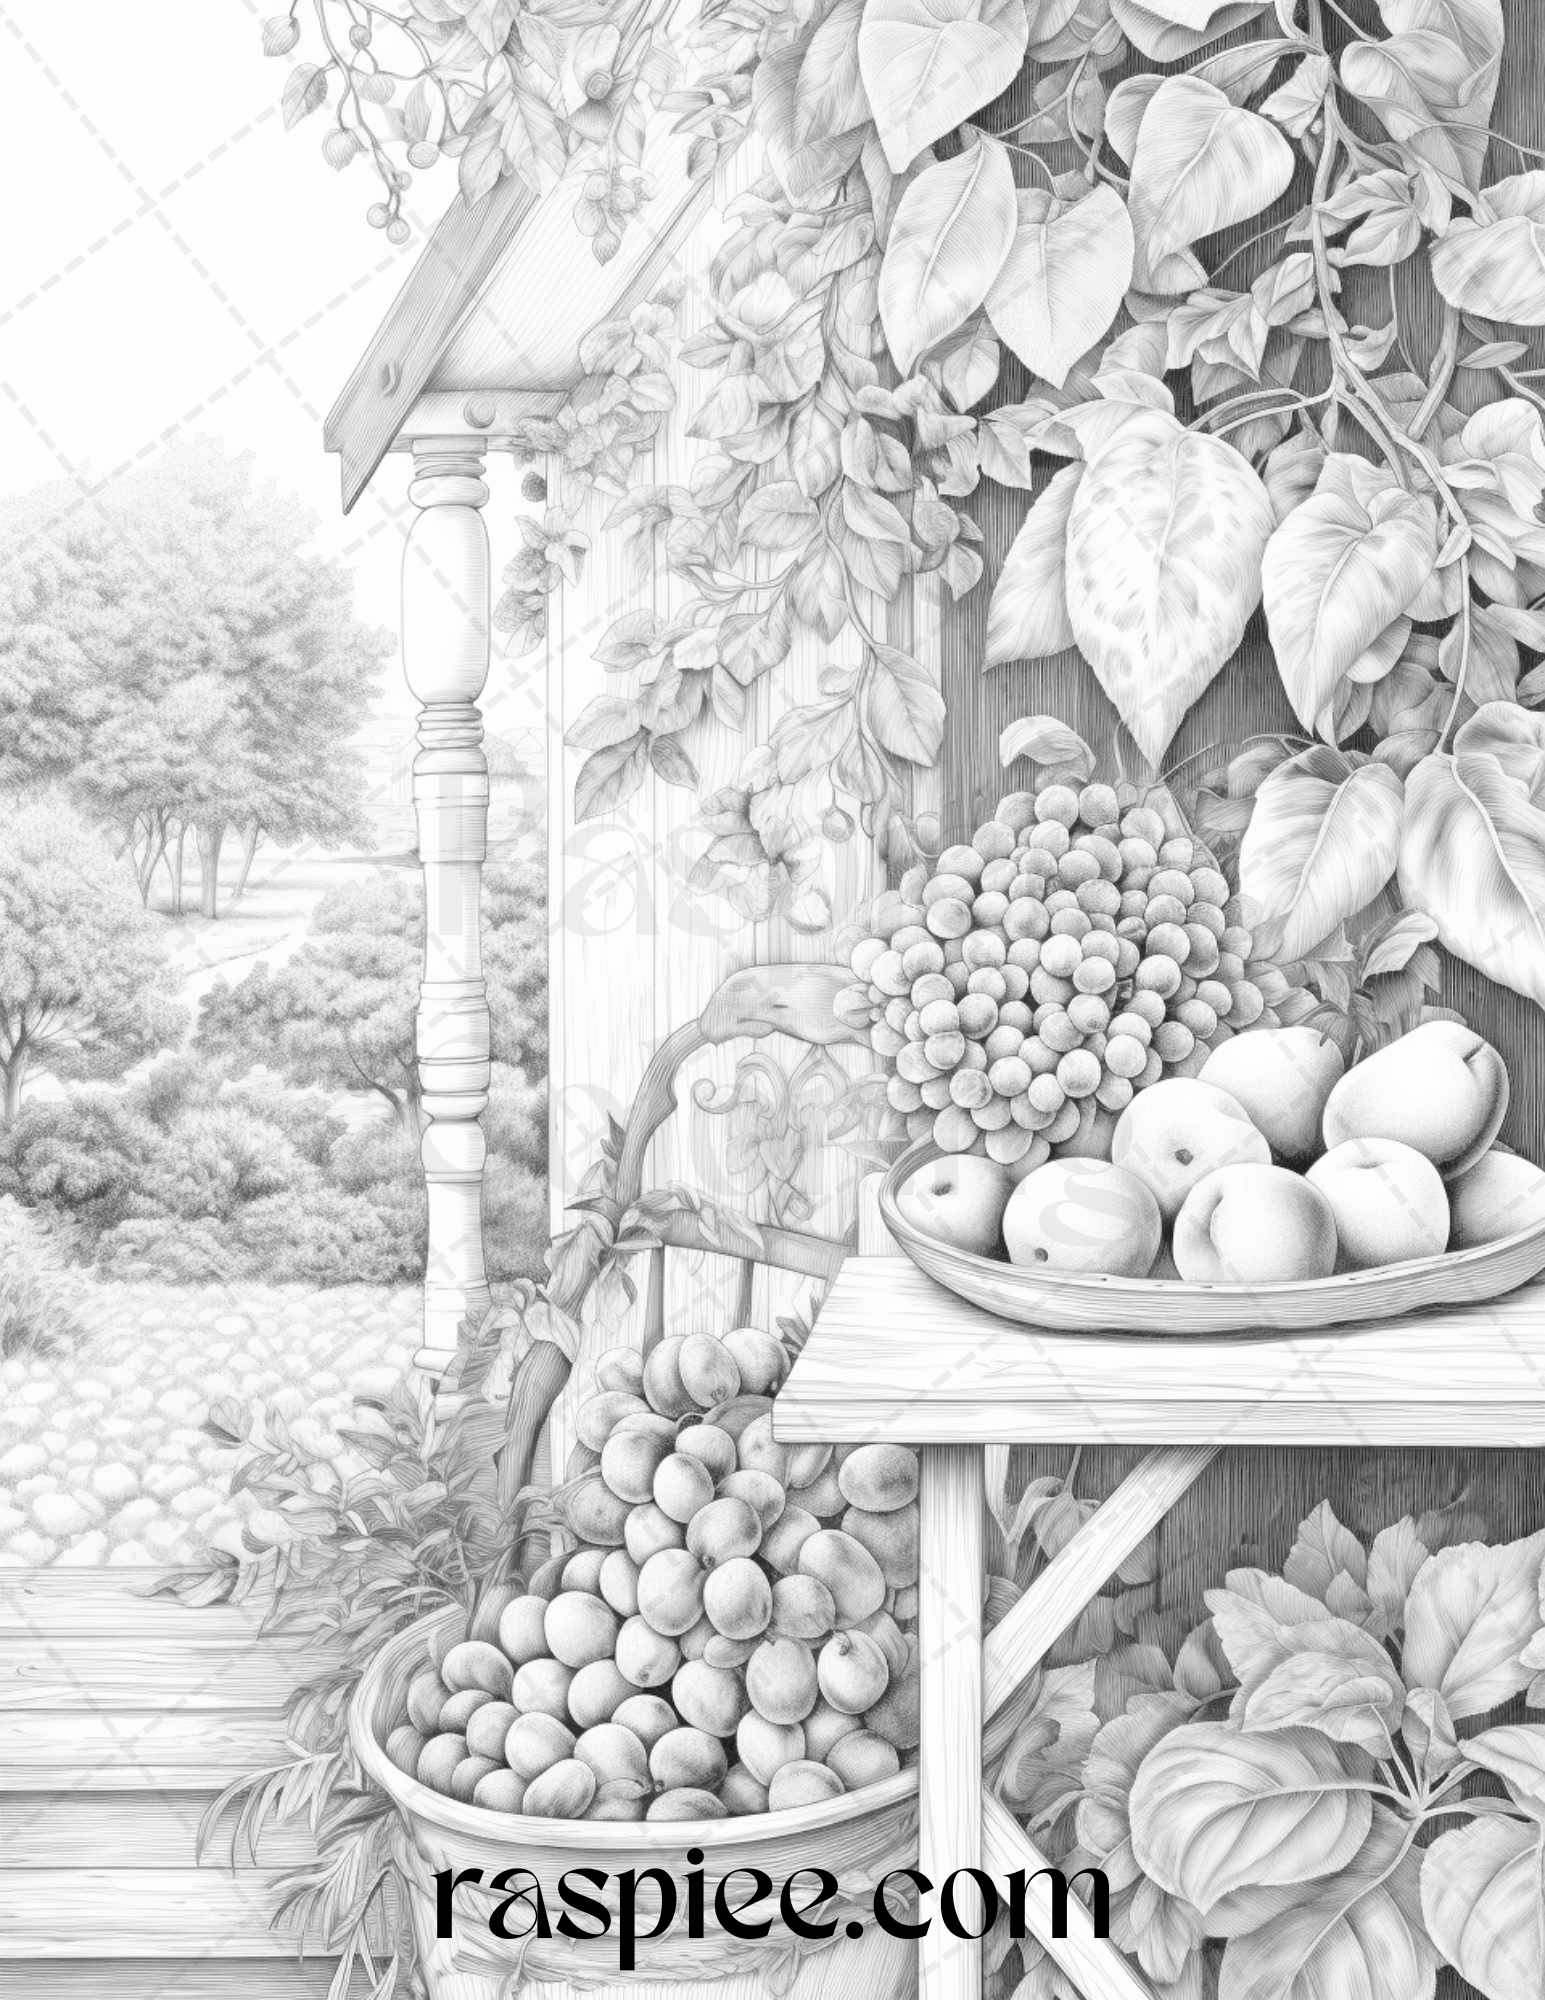 Fruit garden grayscale coloring pages, printable adult coloring, relaxation botanical art, stress relief coloring, detailed grayscale illustrations